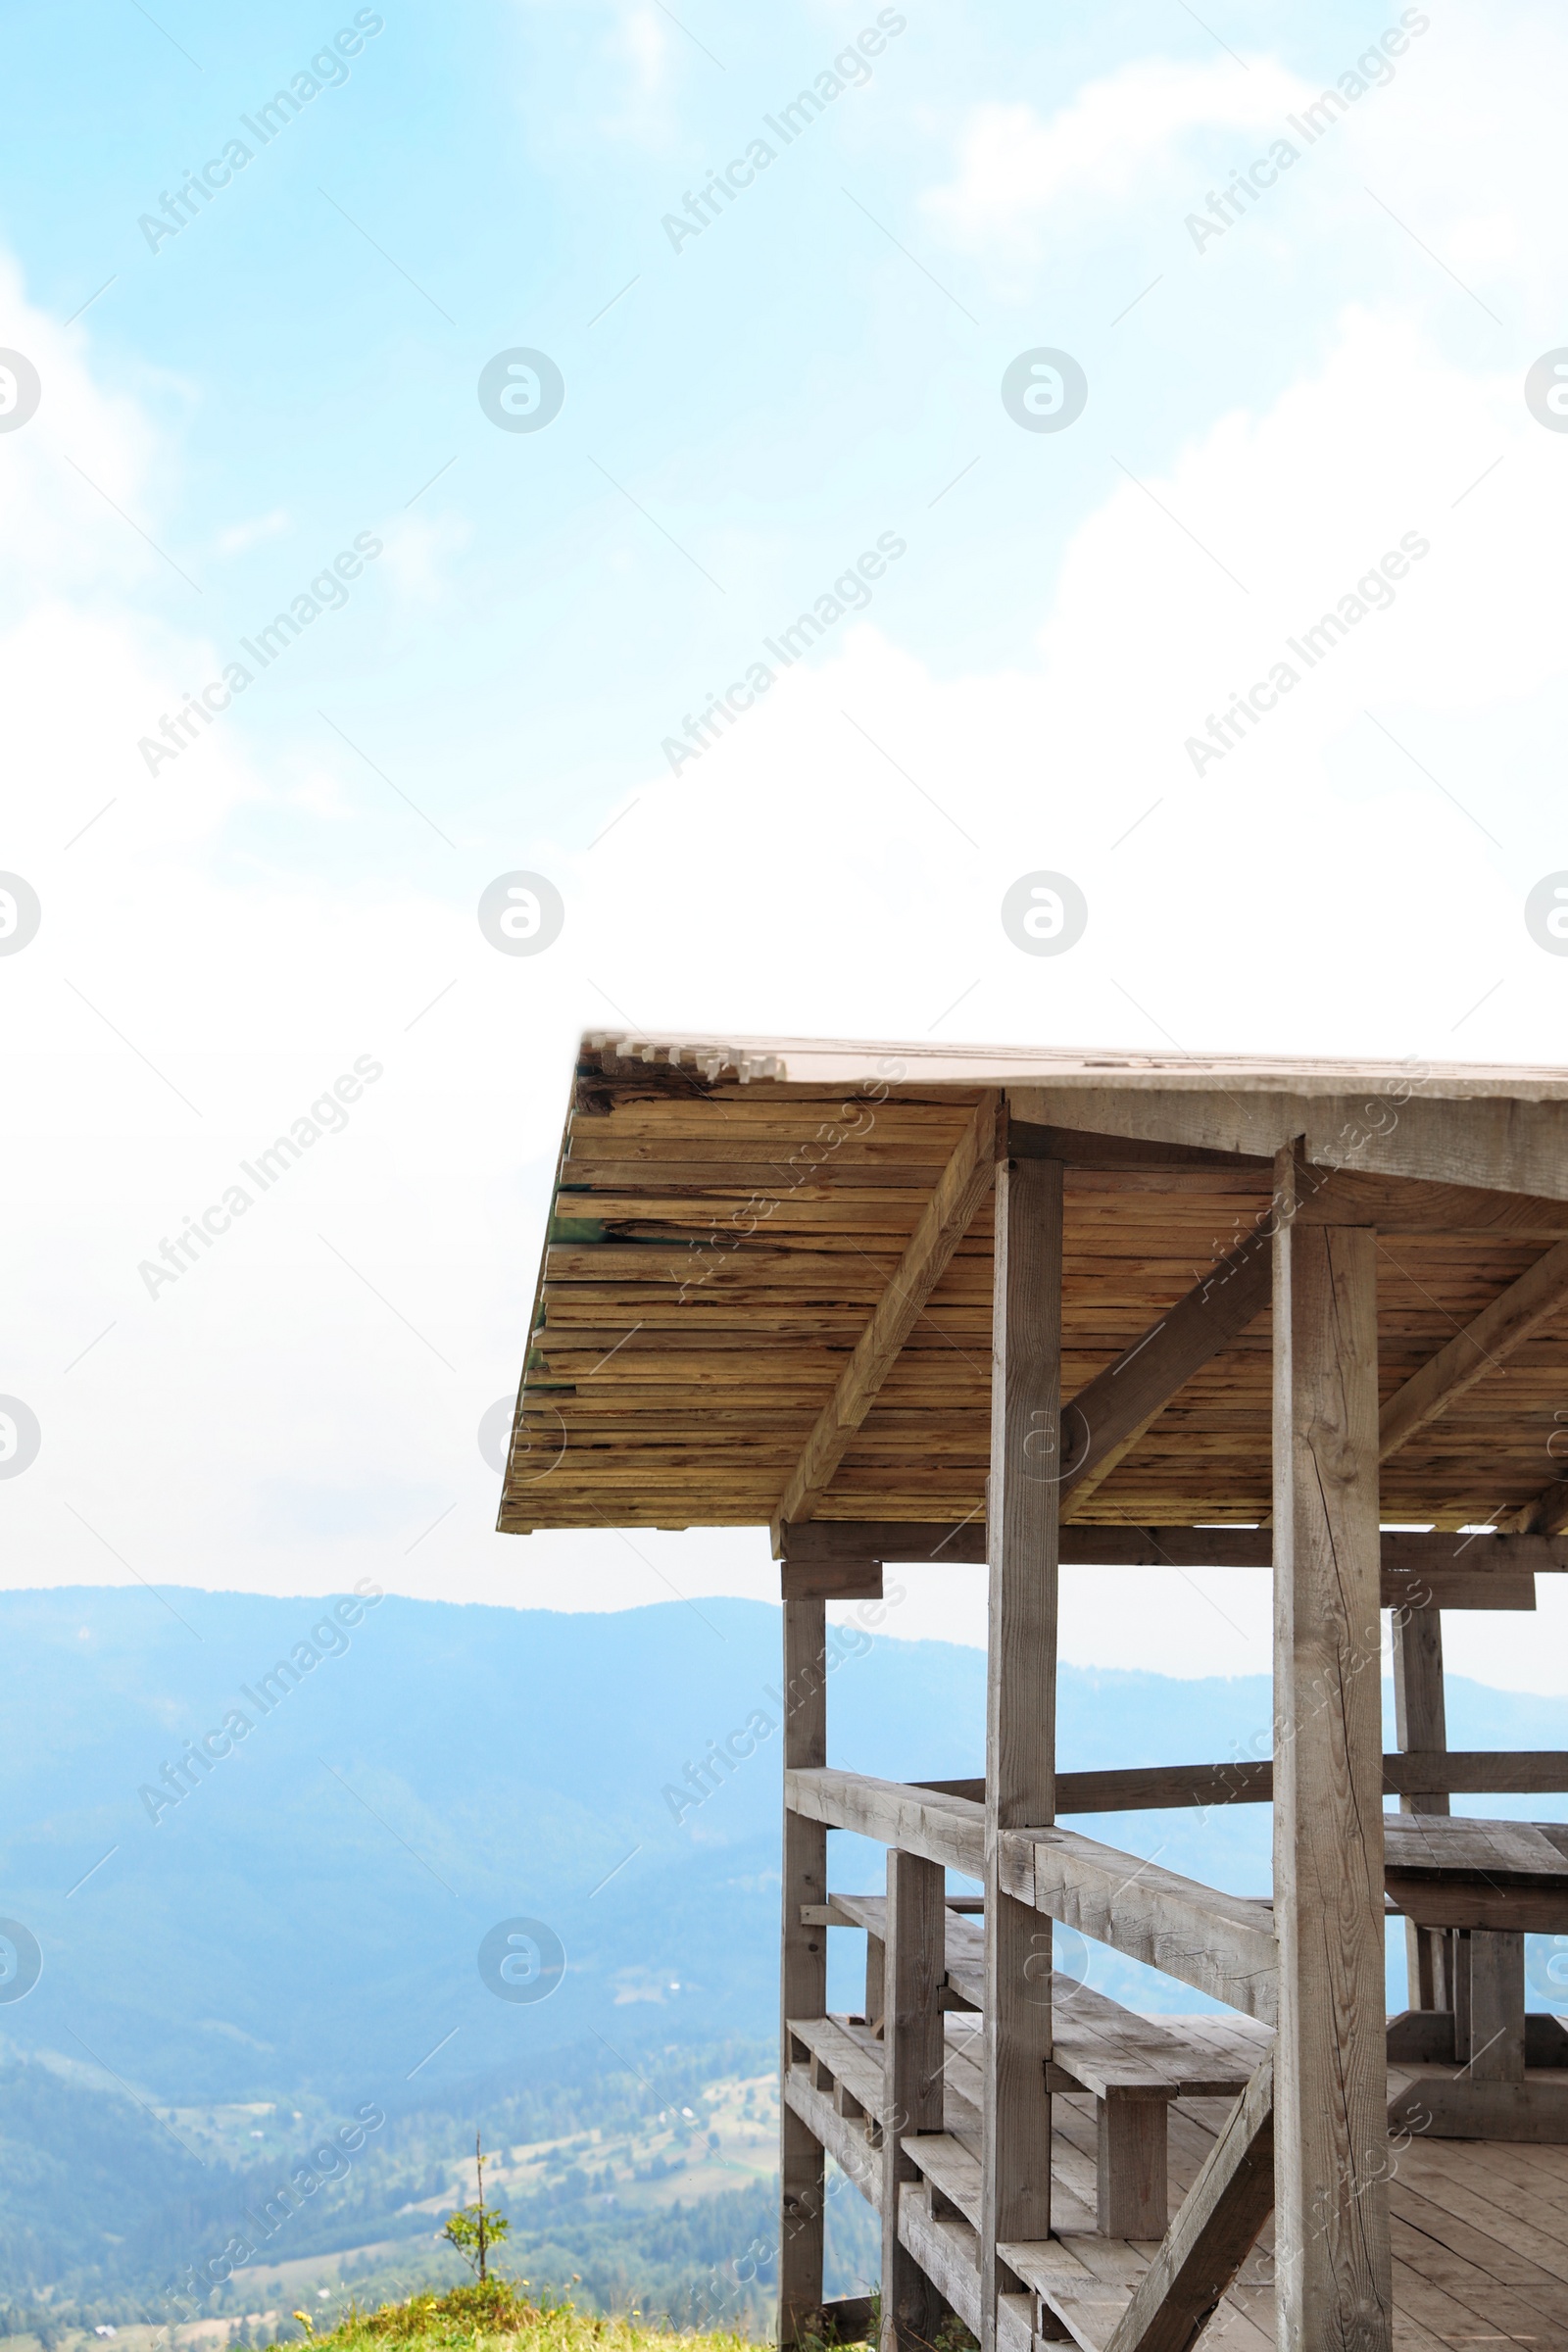 Photo of Picturesque landscape with wooden gazebo and mountain forest on background